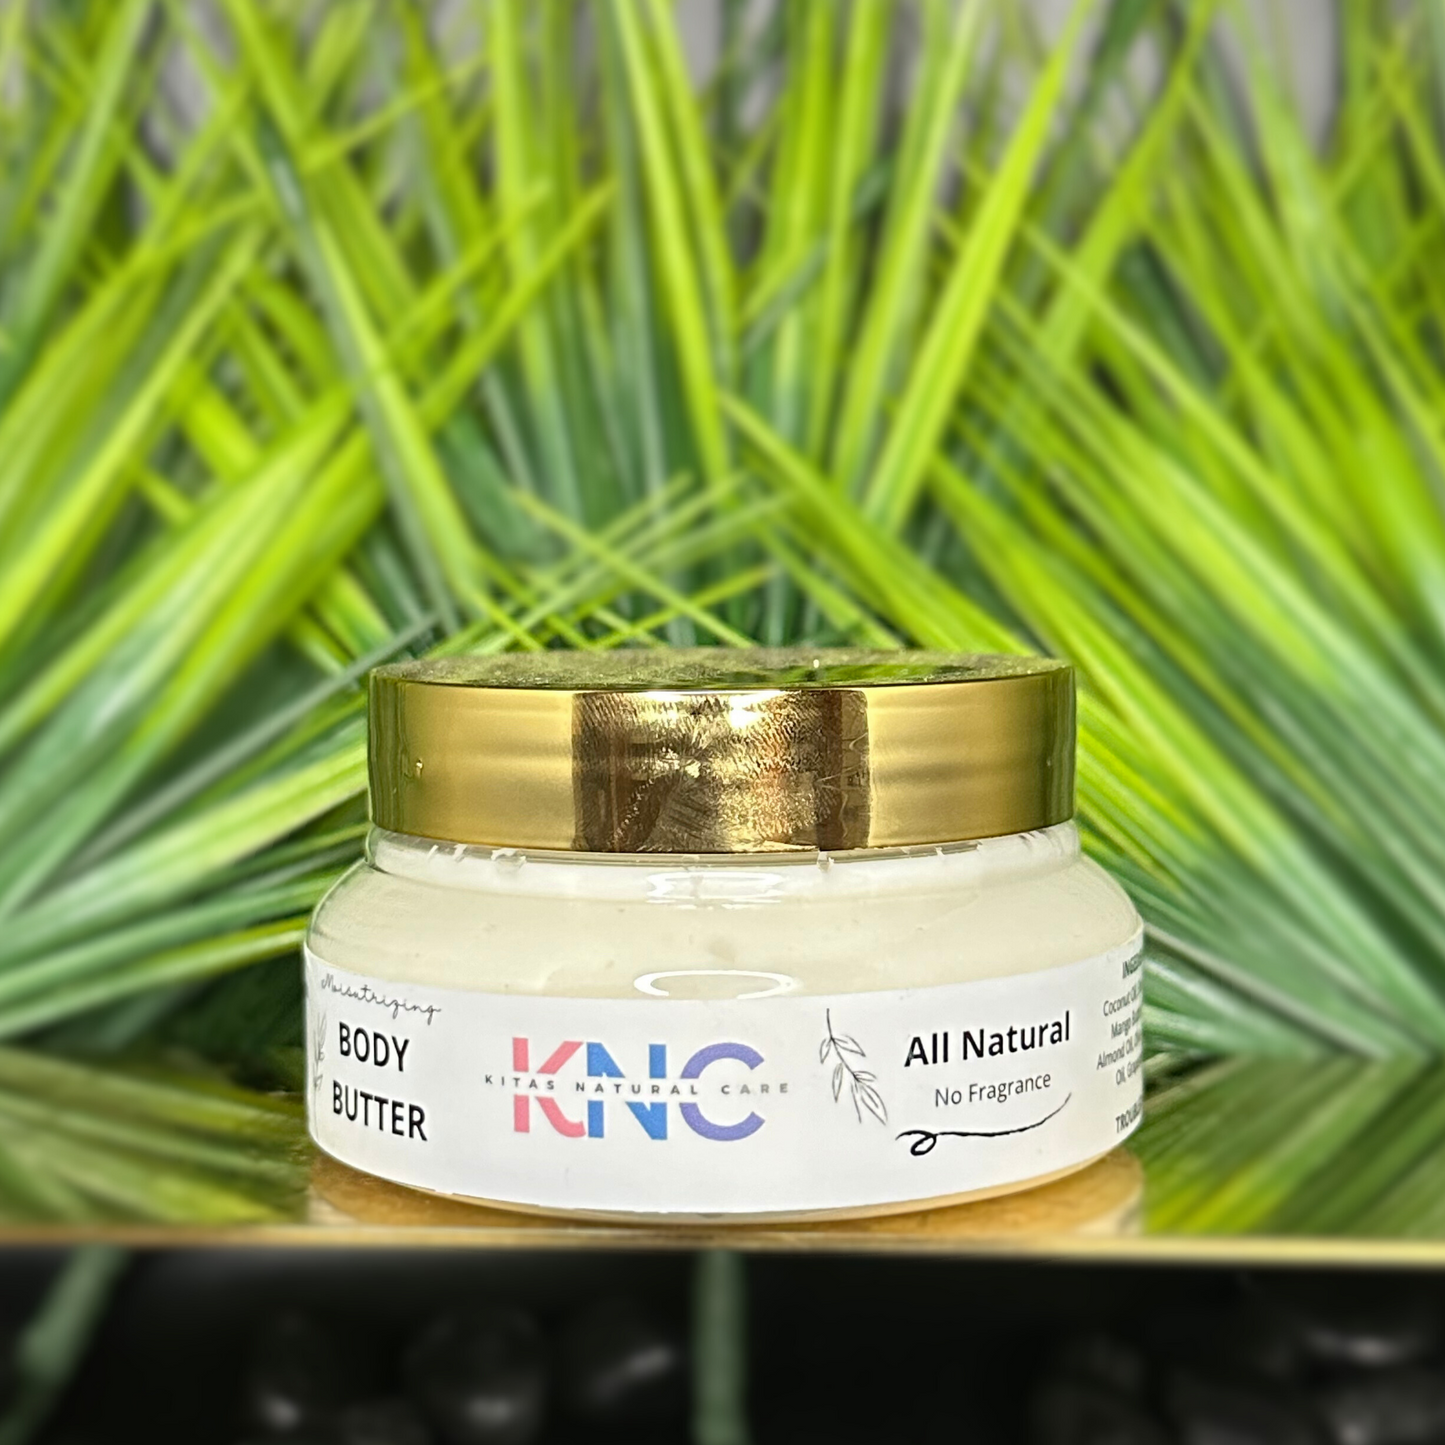 All Natural - Body Butter